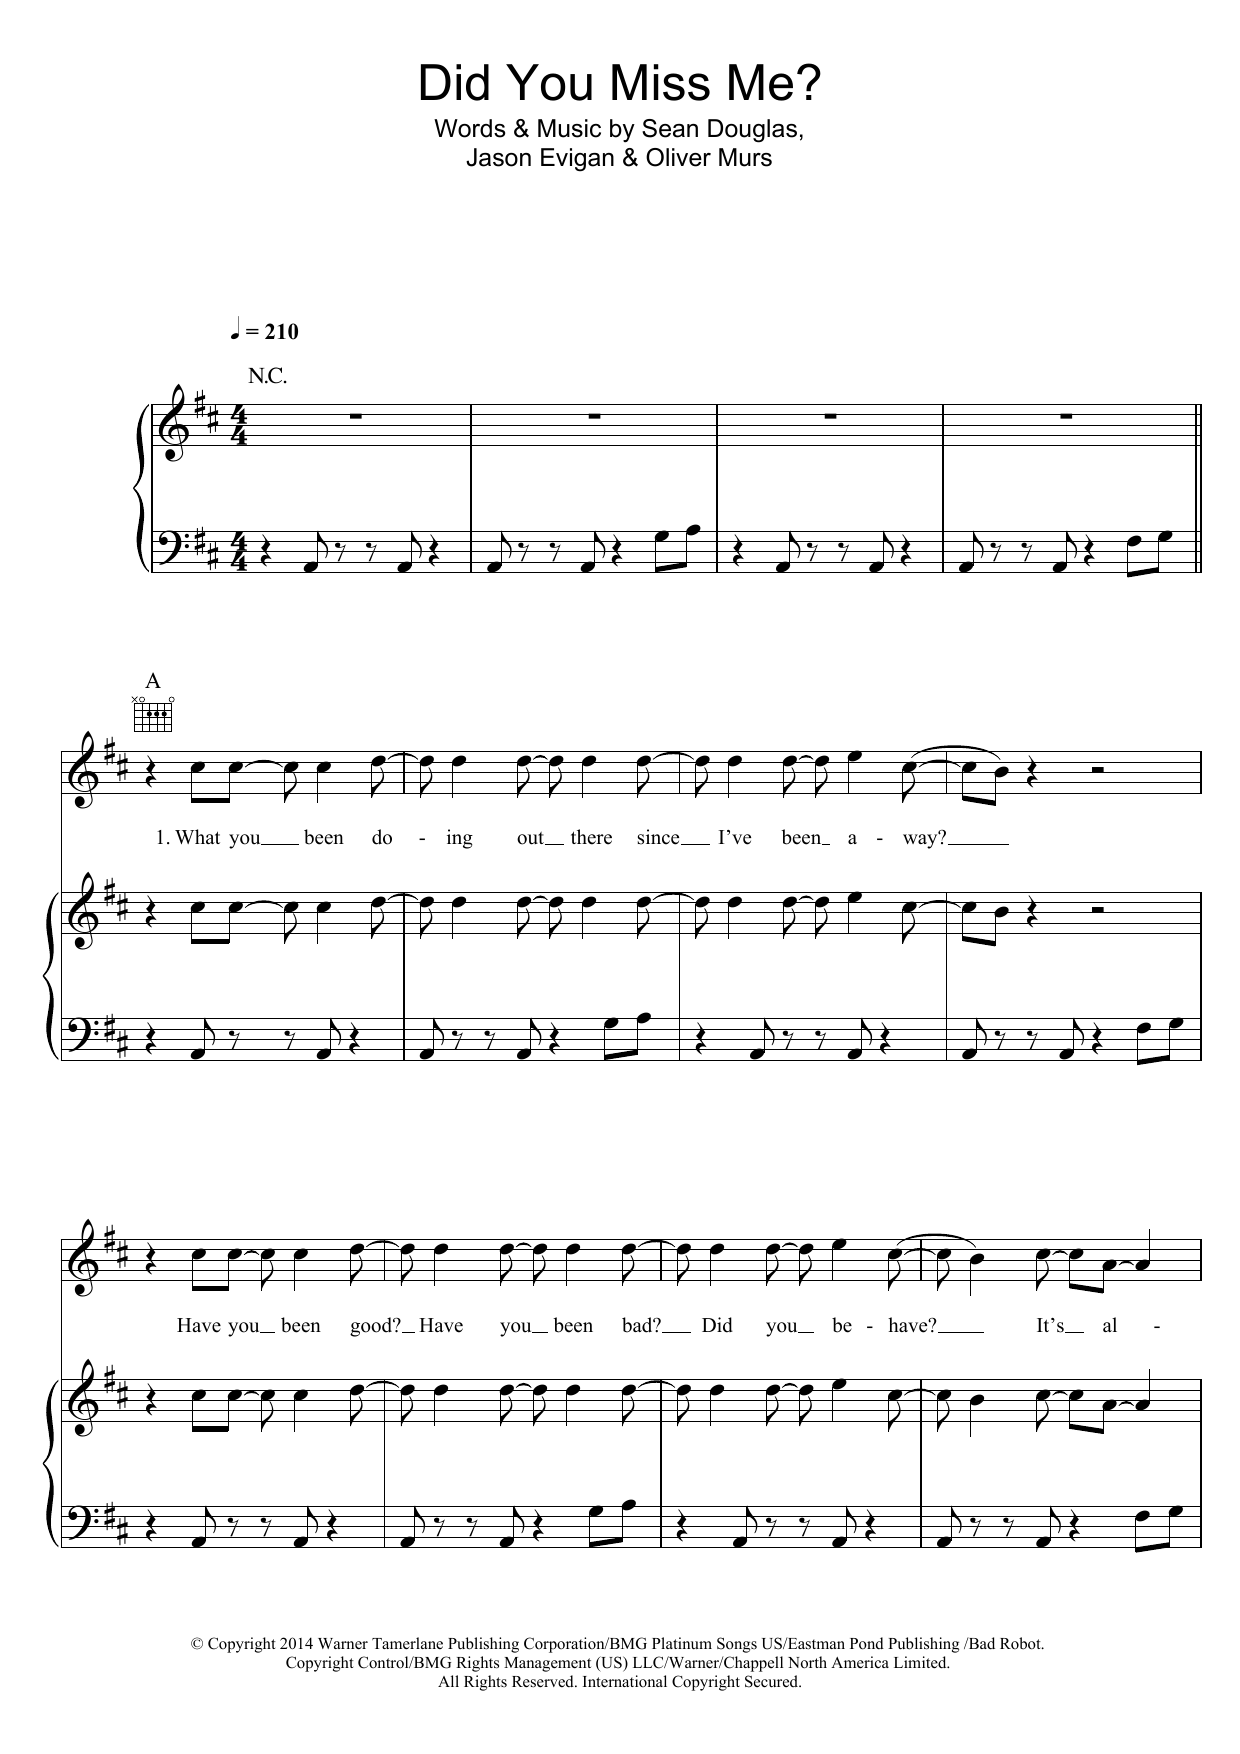 Download Olly Murs Did You Miss Me Sheet Music